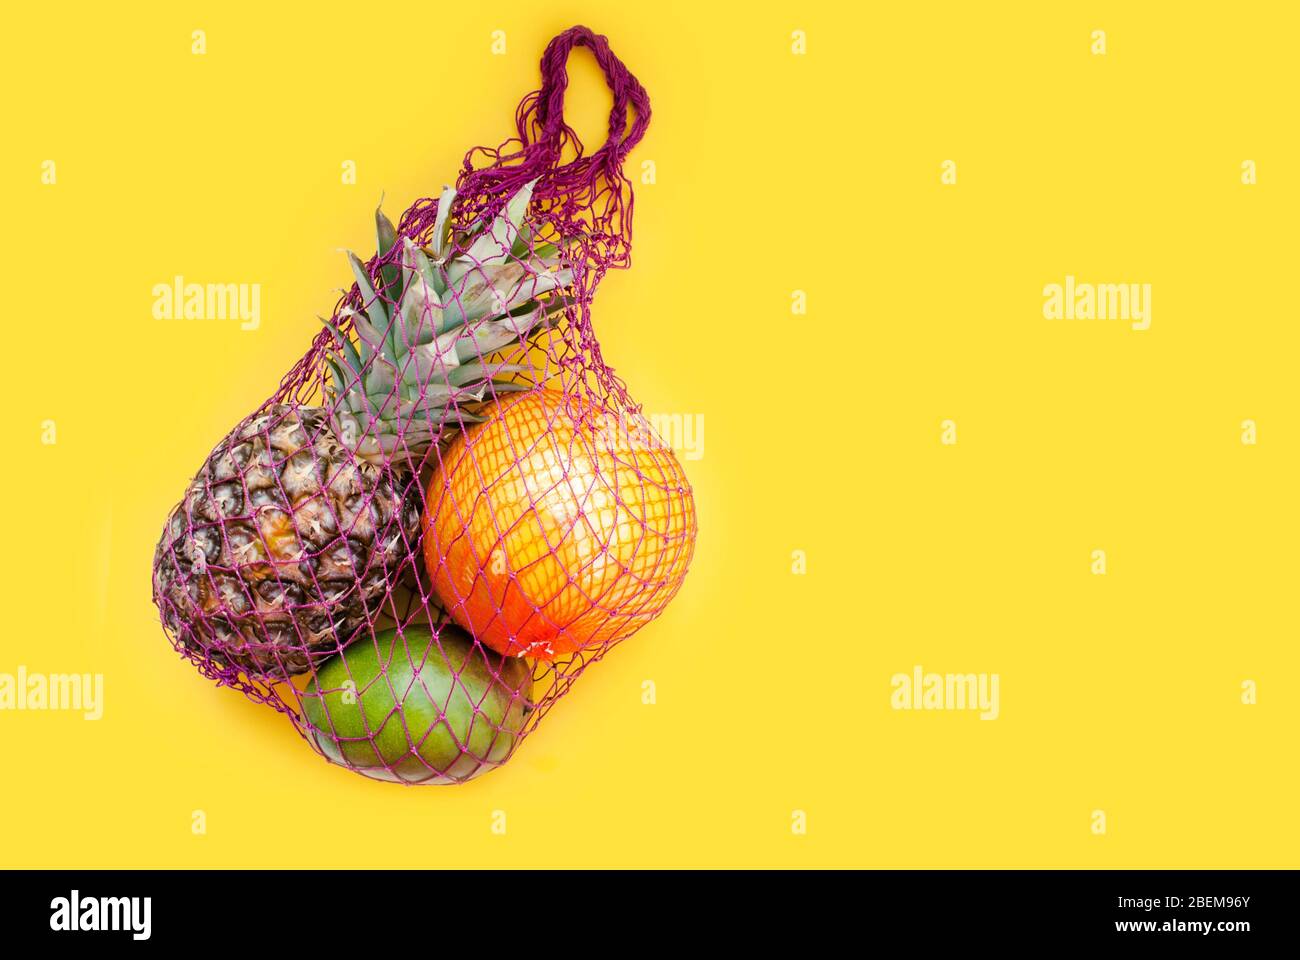 https://c8.alamy.com/comp/2BEM96Y/tropical-fruits-in-a-string-string-bag-pineapple-mango-pomelo-yellow-background-place-for-text-2BEM96Y.jpg